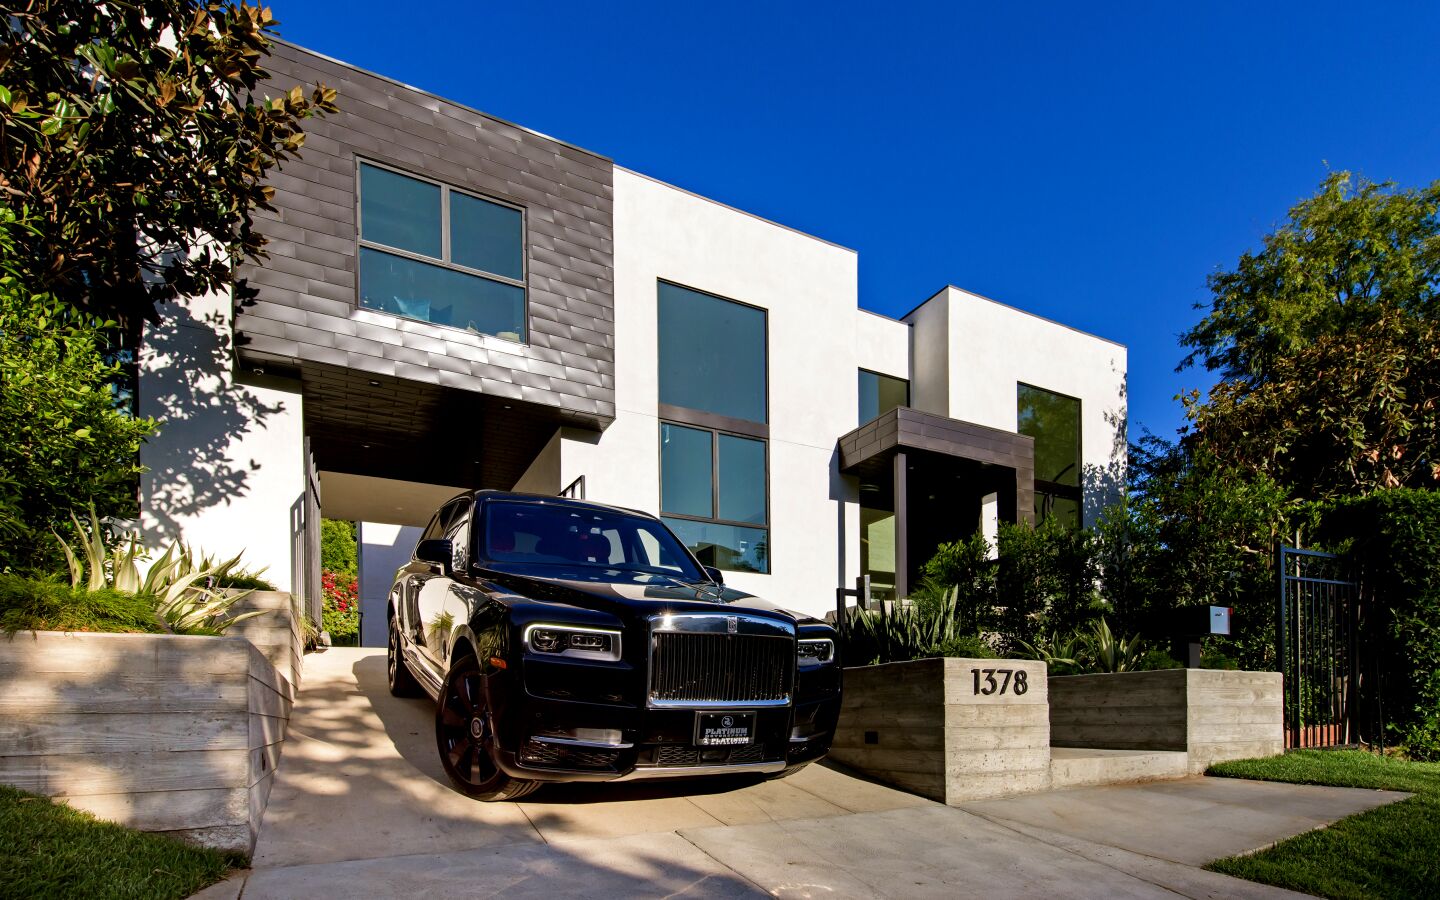 The fresh contemporary home in Hollywood Hills West is nicknamed the 'Solarium' for its voluminous step-down living room, which has a wall of steel-framed windows. Listed for $9.995 million, the multi-level house has six bedrooms and seven bathrooms in more than 6,500 square feet of space. There's also separate guest quarters. Museum-like interiors feature gallery walls and high ceilings ideal for showcasing artwork. The chef's kitchen is equipped with an island and French doors that open to the backyard. (Marc Angeles / Unlimited Style Real Estate Photography)